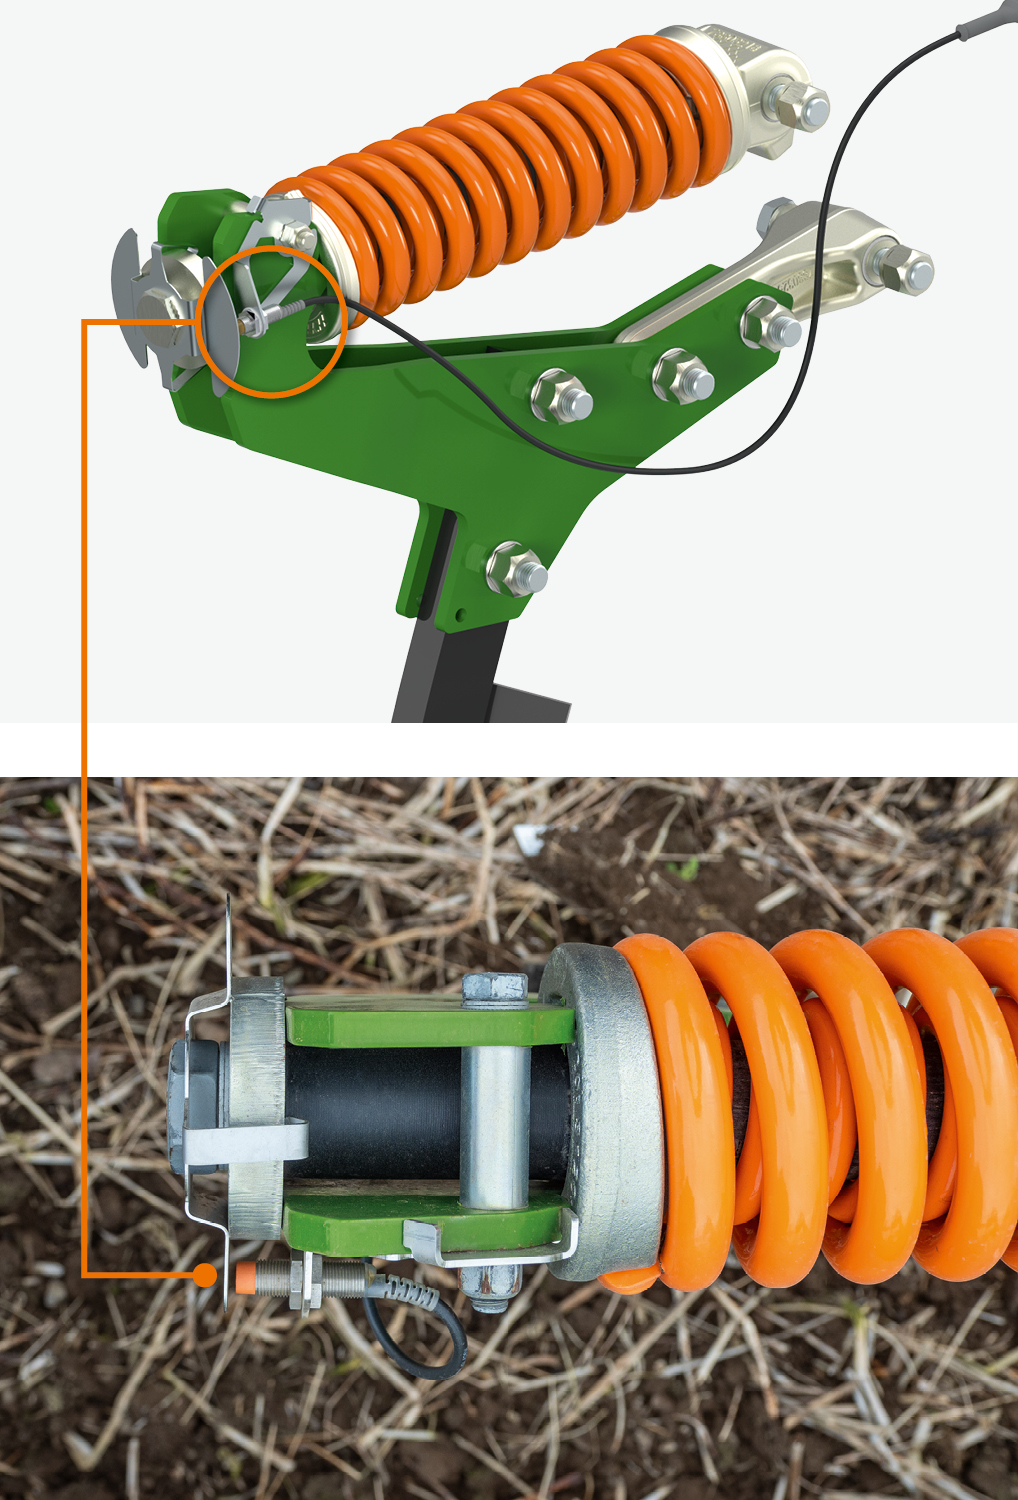 With AutoTill, AMAZONE has developed a mechanical function monitor